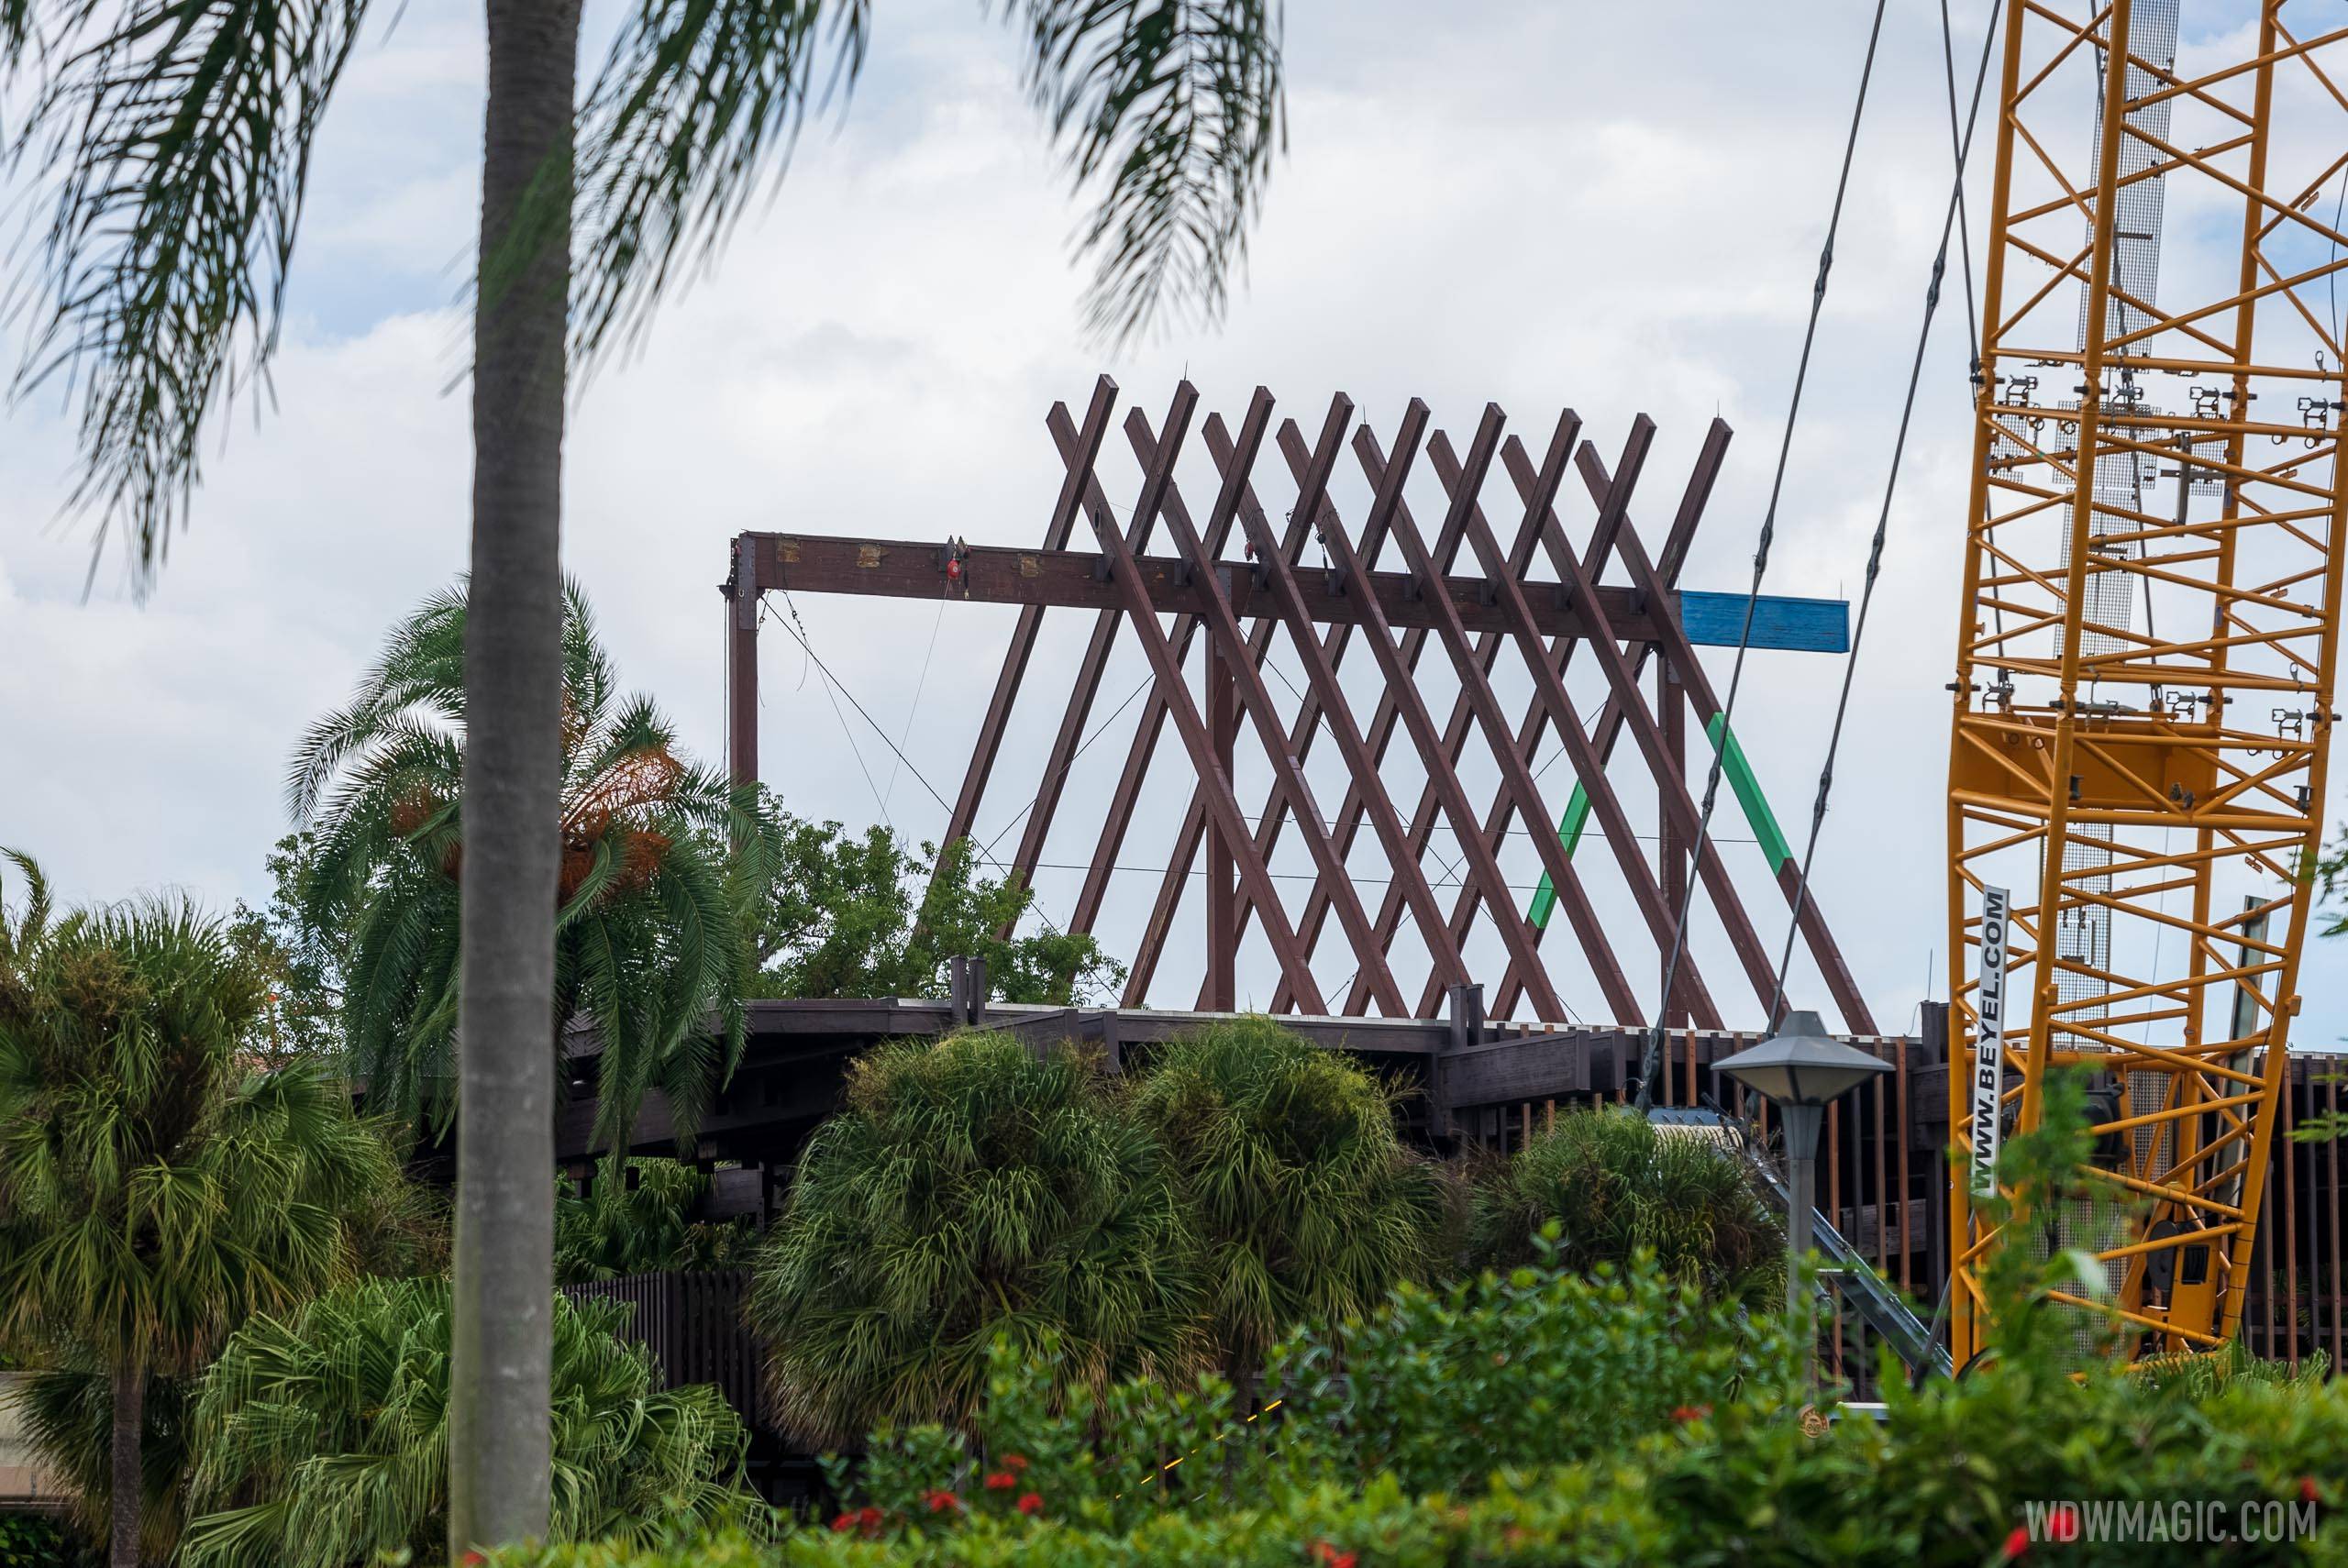 PHOTOS - Latest look at the Polynesian Village Resort roofline changes